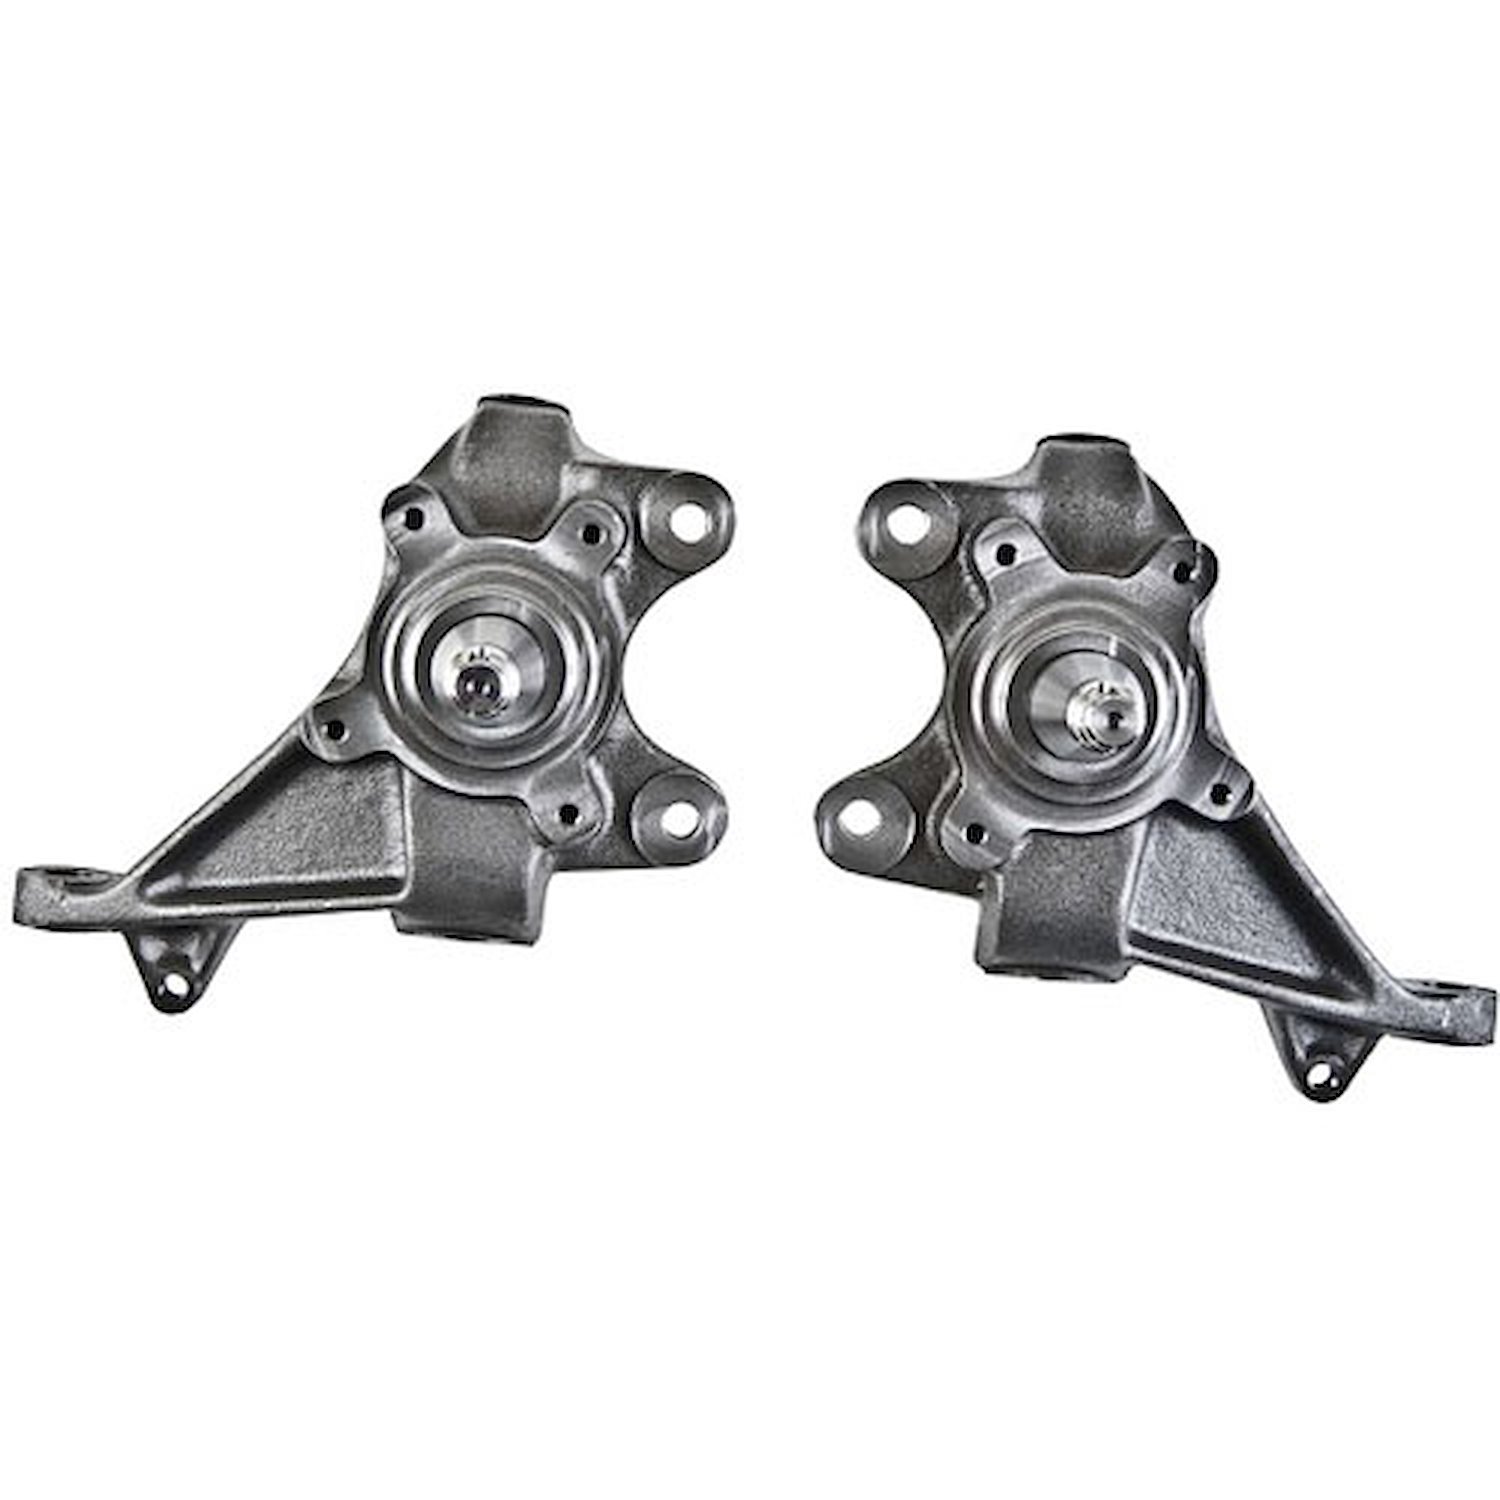 2" Drop Spindles for 1984-1995 Toyota Pickup